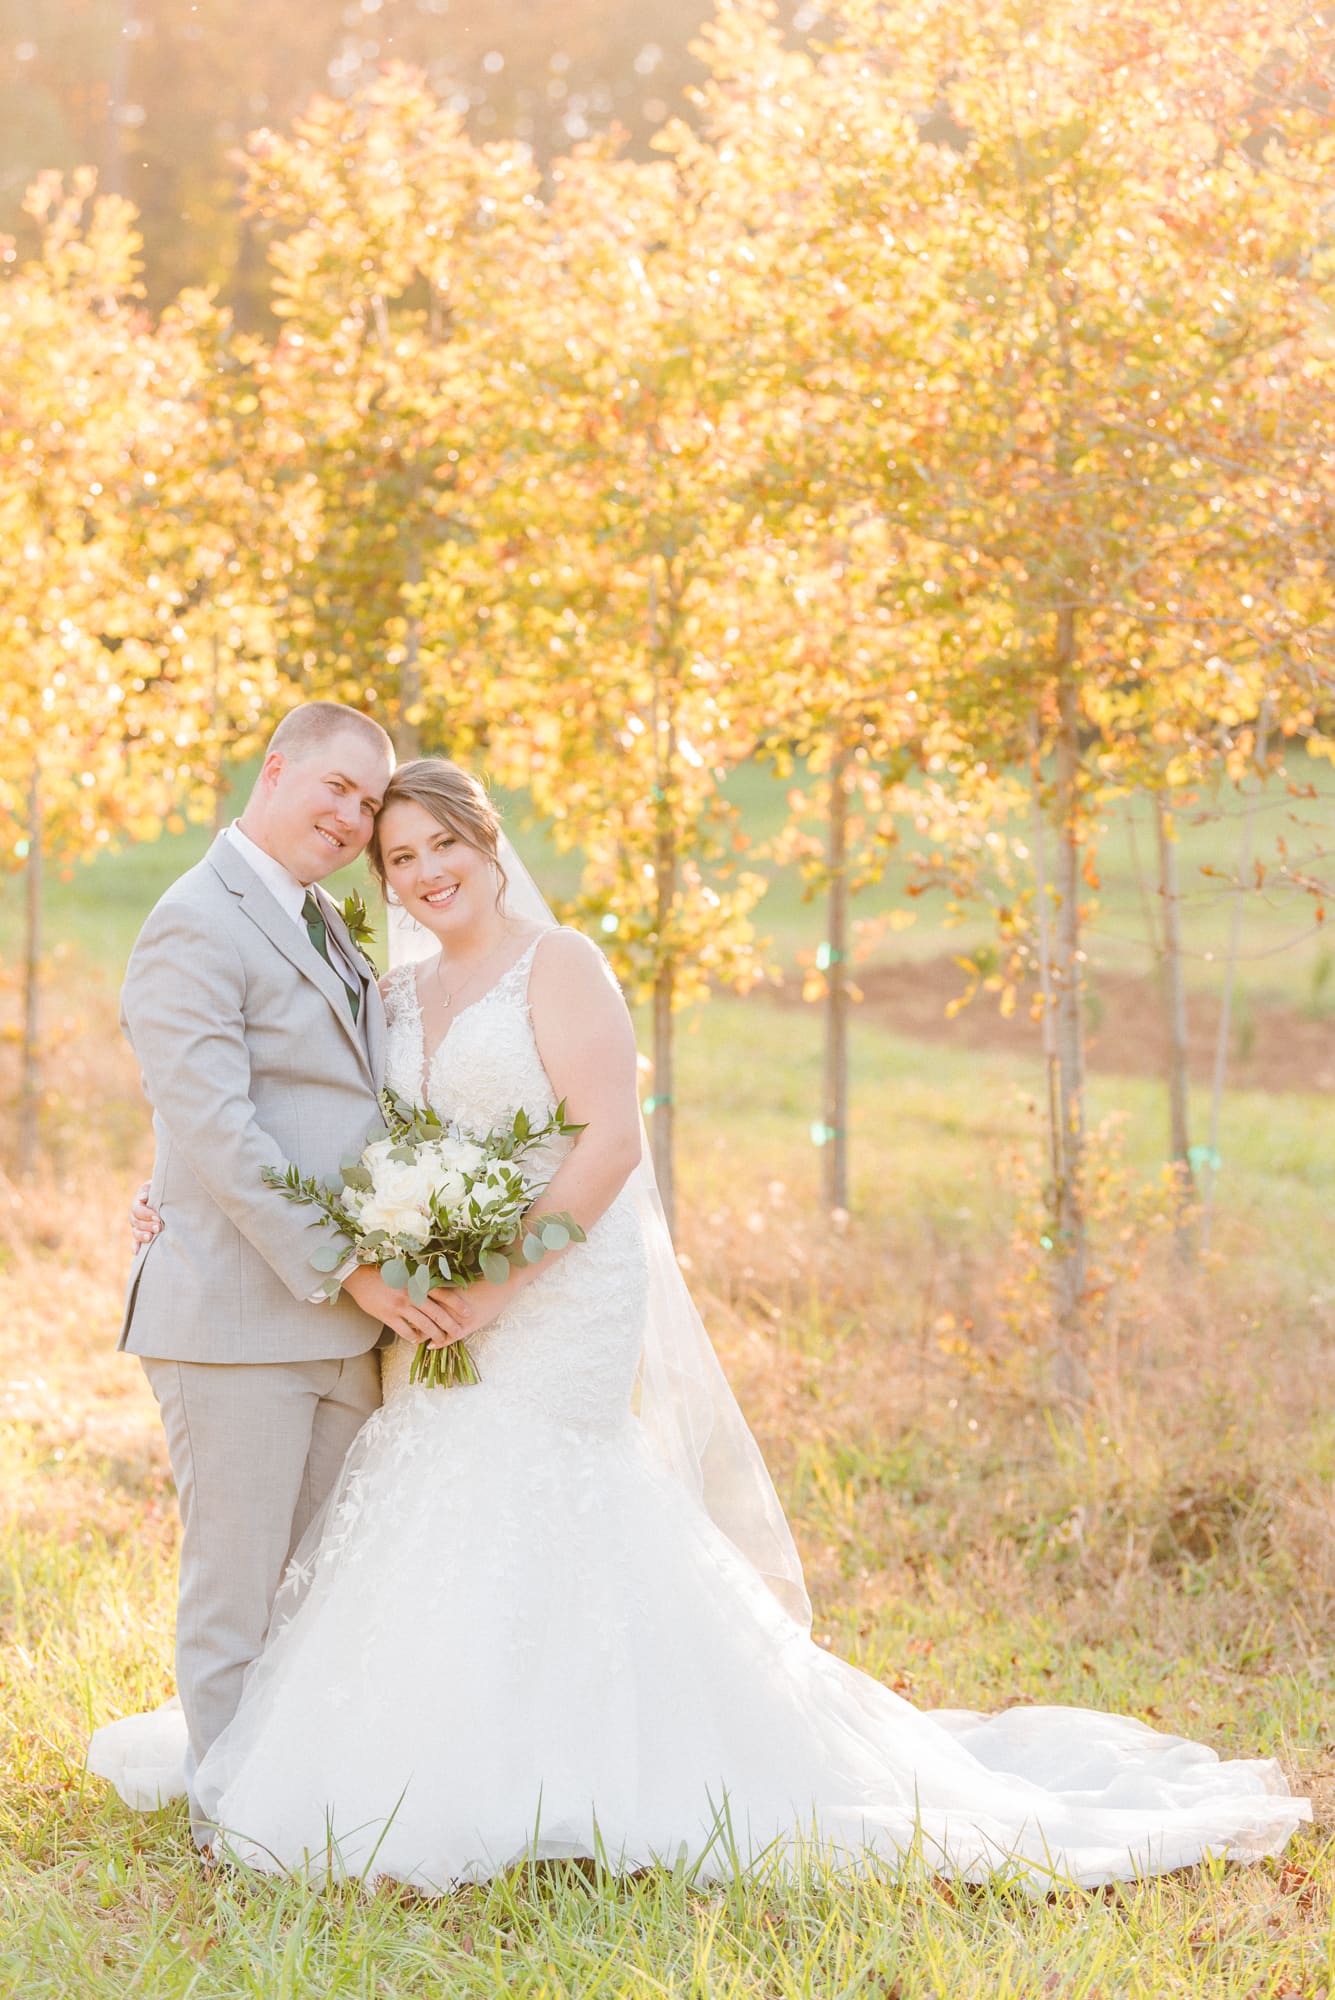 Low Meadows Estate has a row of orange and yellow tress, the light shines through them as the bride and groom smile at the camera.